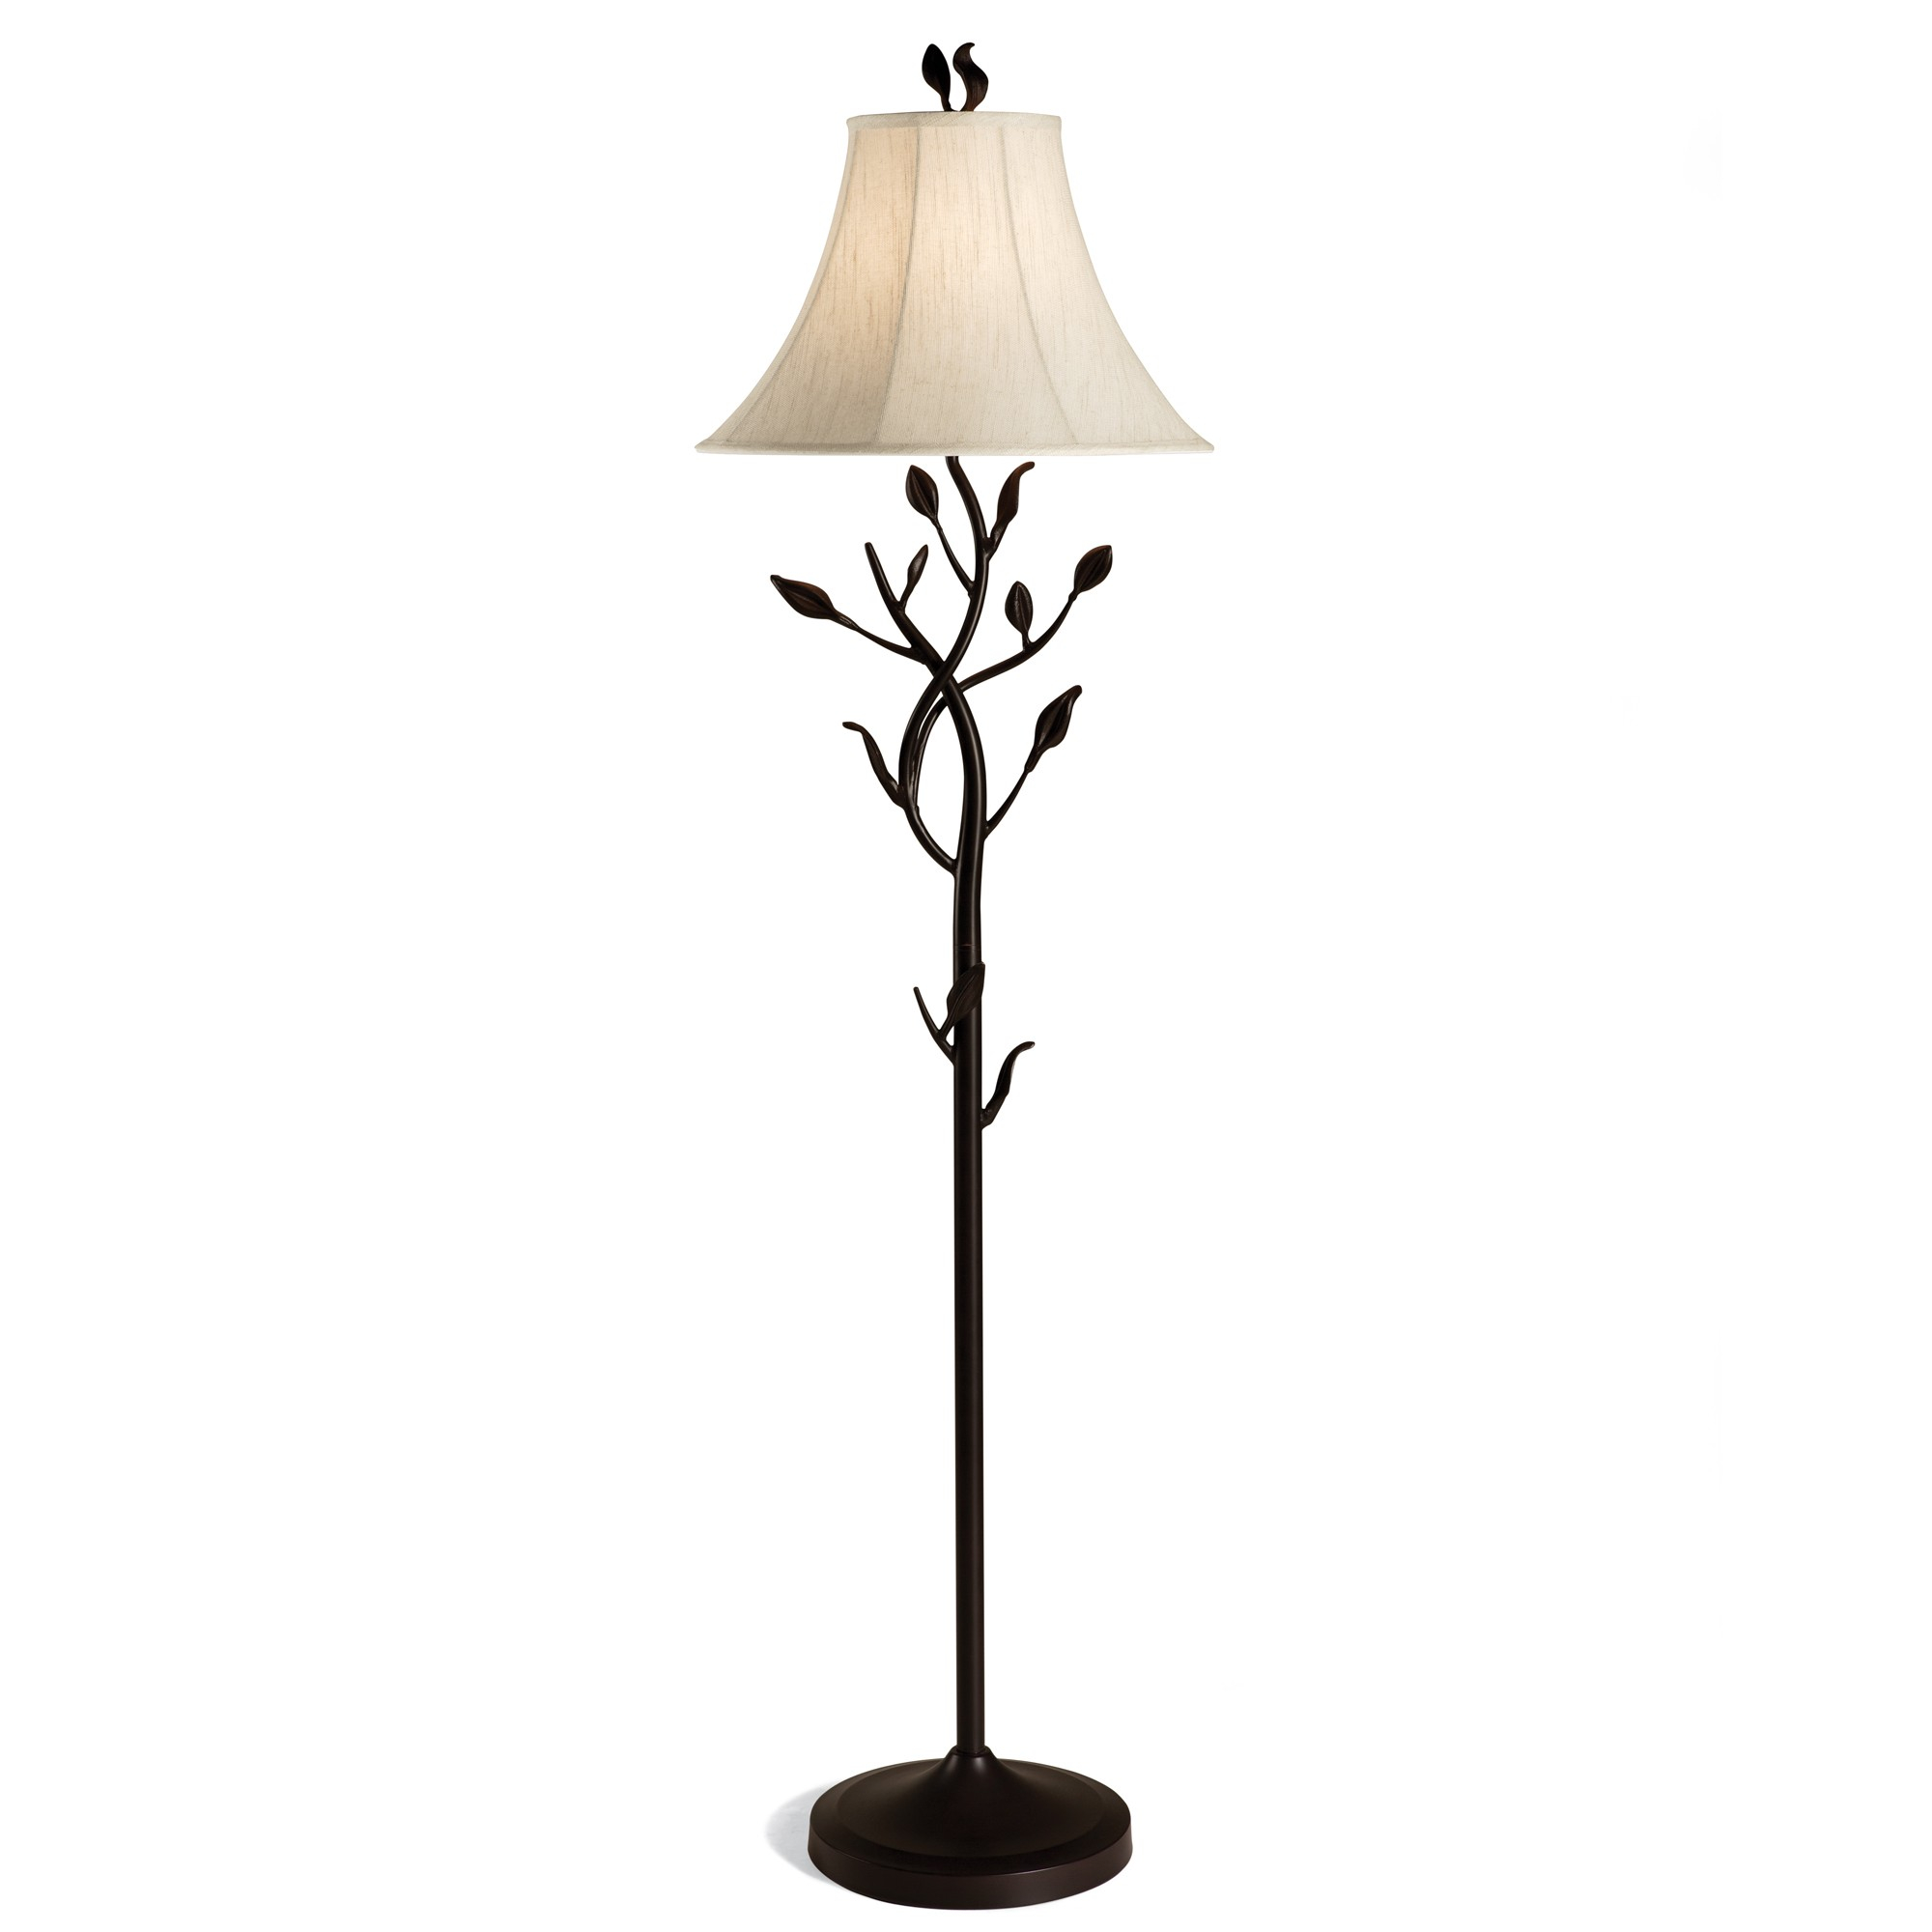 Wrought Iron Tree Floor Lamp pertaining to size 2000 X 2000